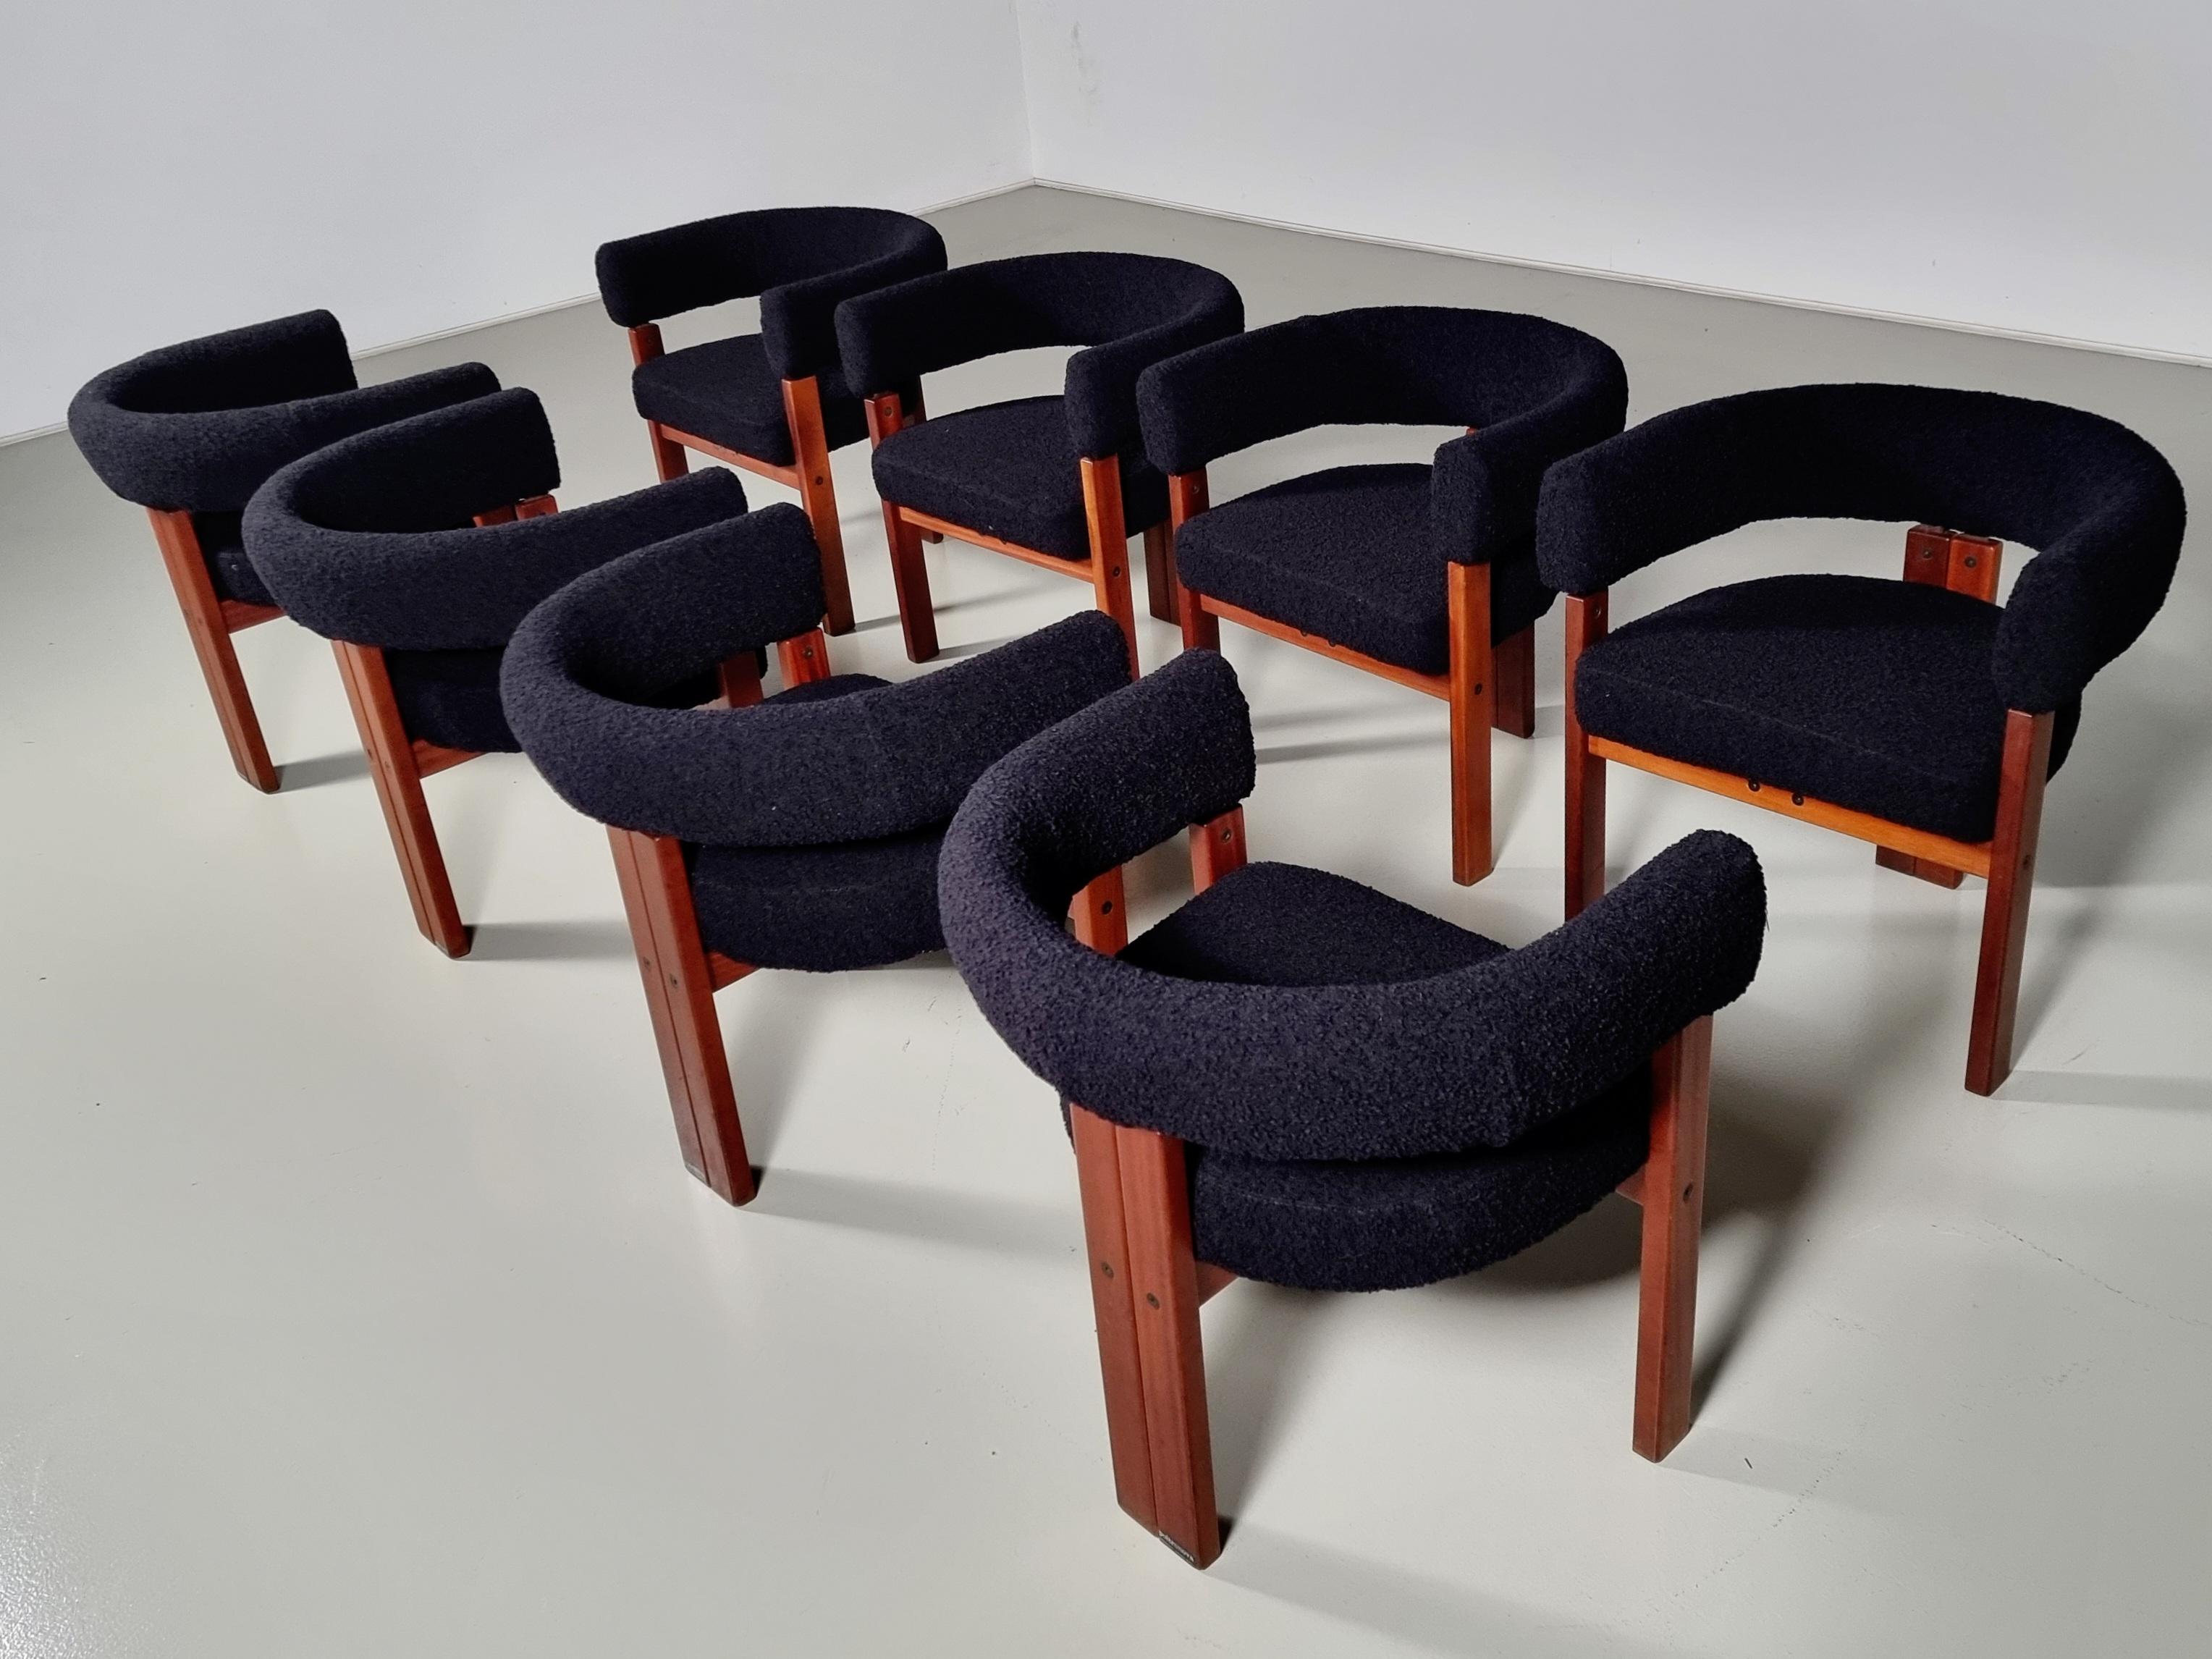 Ettore Sottsass set of 8 dining/cocktail chairs for Poltronova, Italy, in the 1970s. A simplistic yet very strong design in lines and proportions. Wonderful solid teak wooden frame, which runs over into the big-size armrests for maximum comfort. The